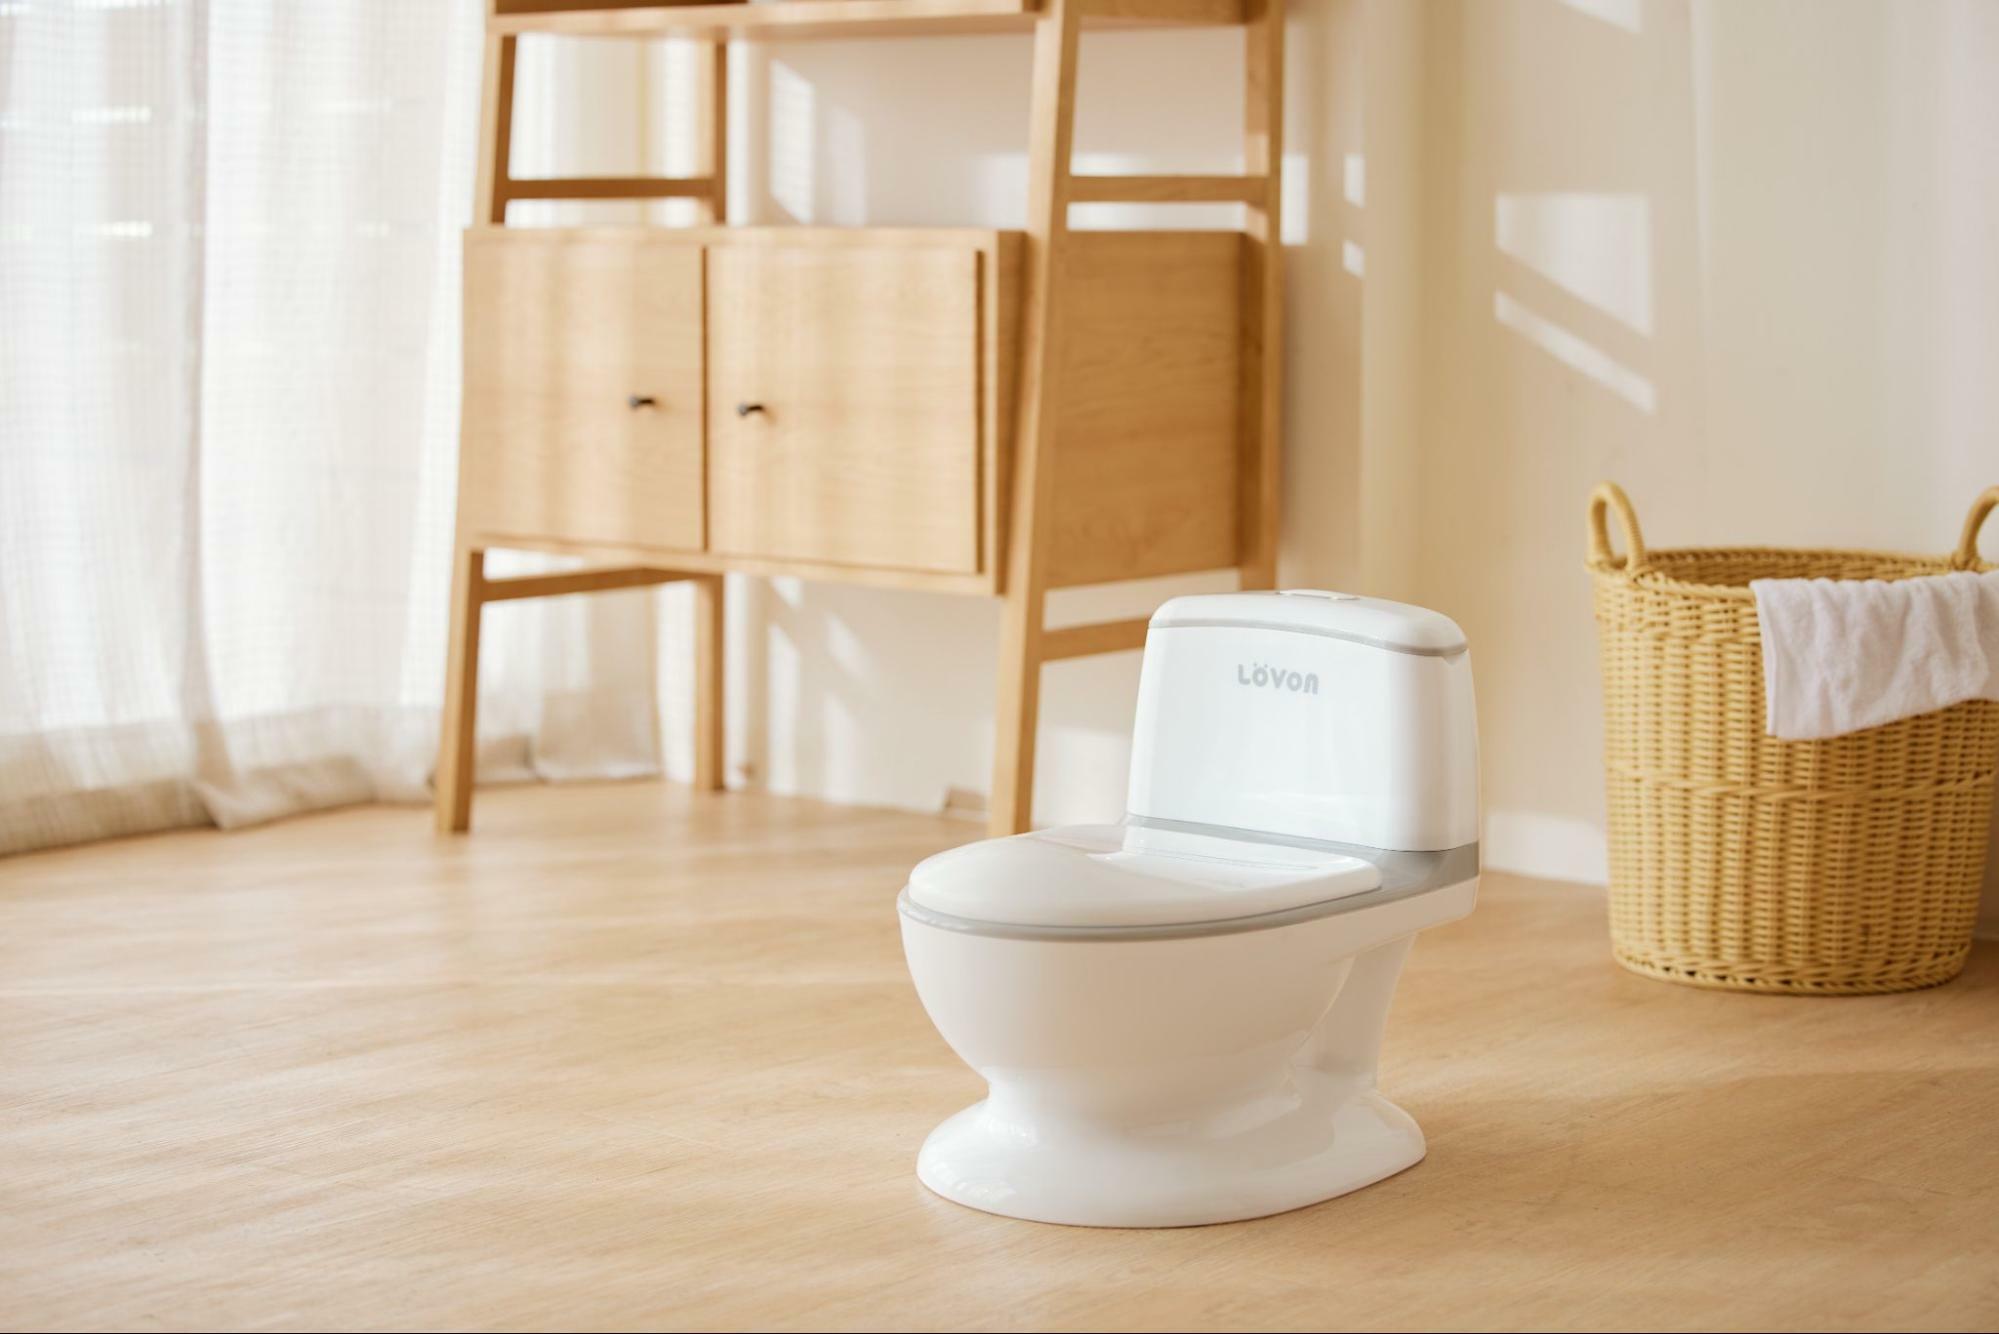 【LOVON】Simulating small toilet learning, a good choice for baby toilet training